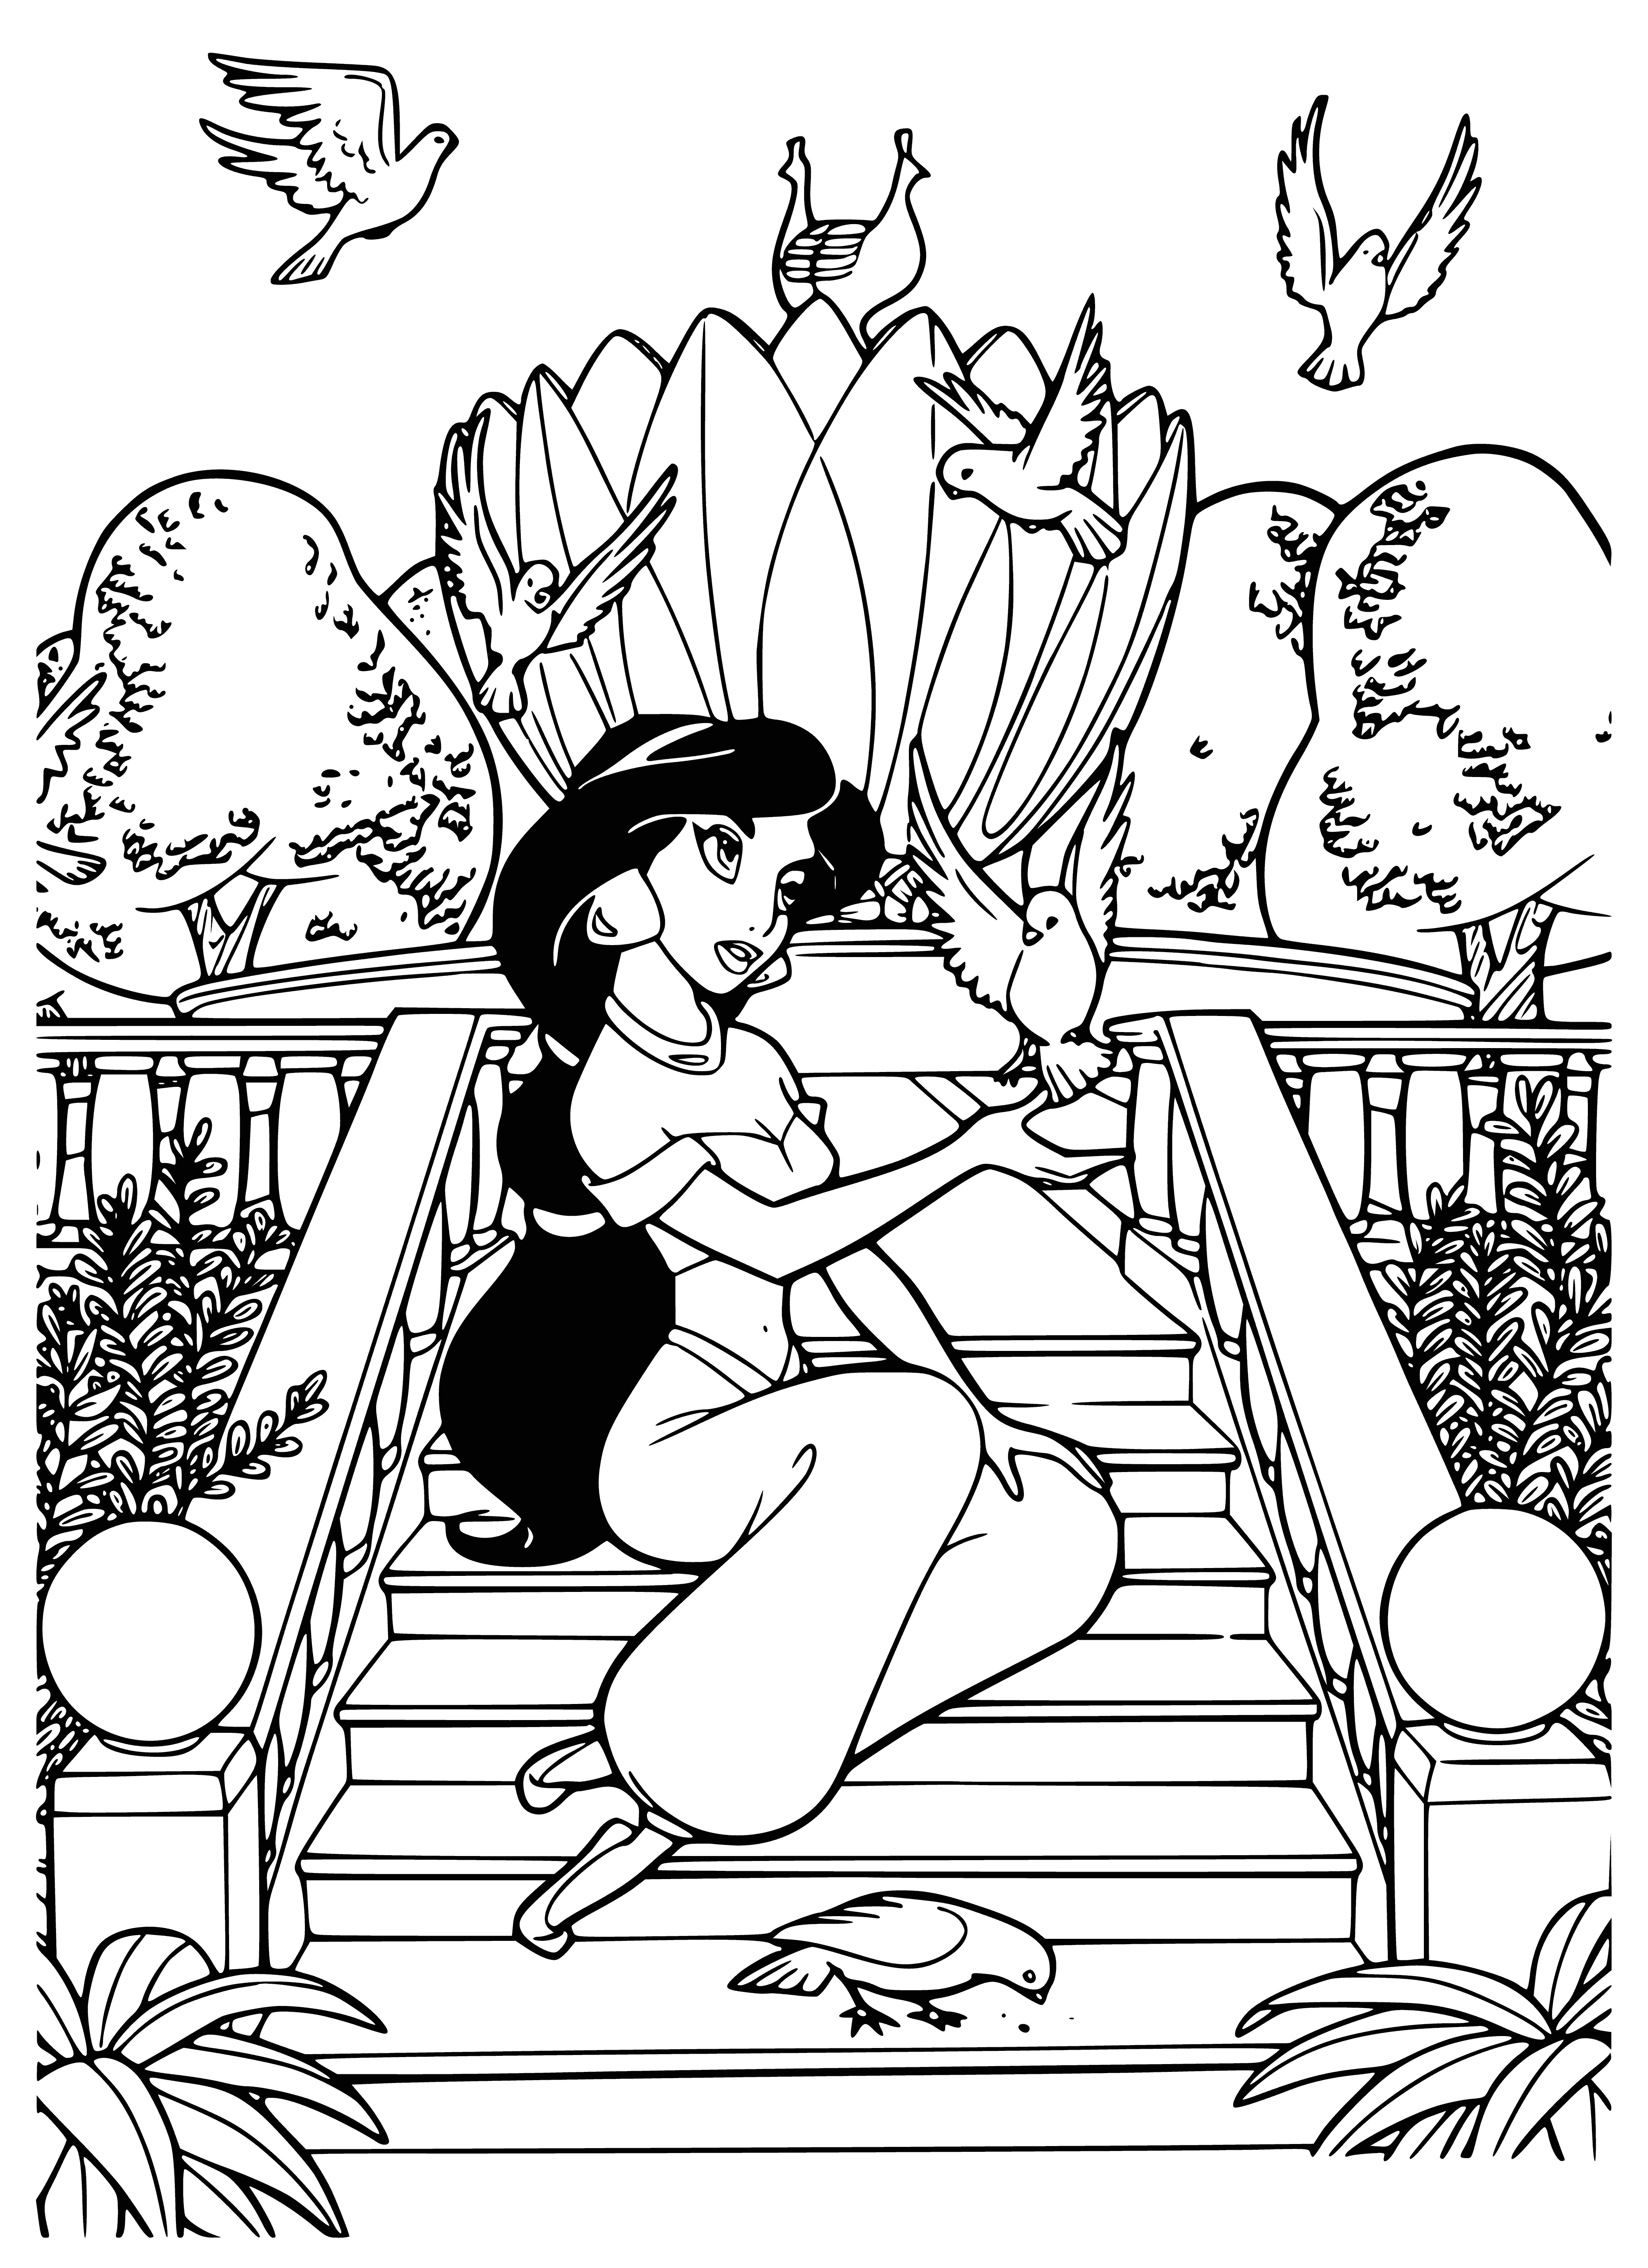 coloring page: Coloring page of princess Jasmine from Aladdin, dressed in purple outfit w/ gold trim & headband, standing by large window with serious expression.